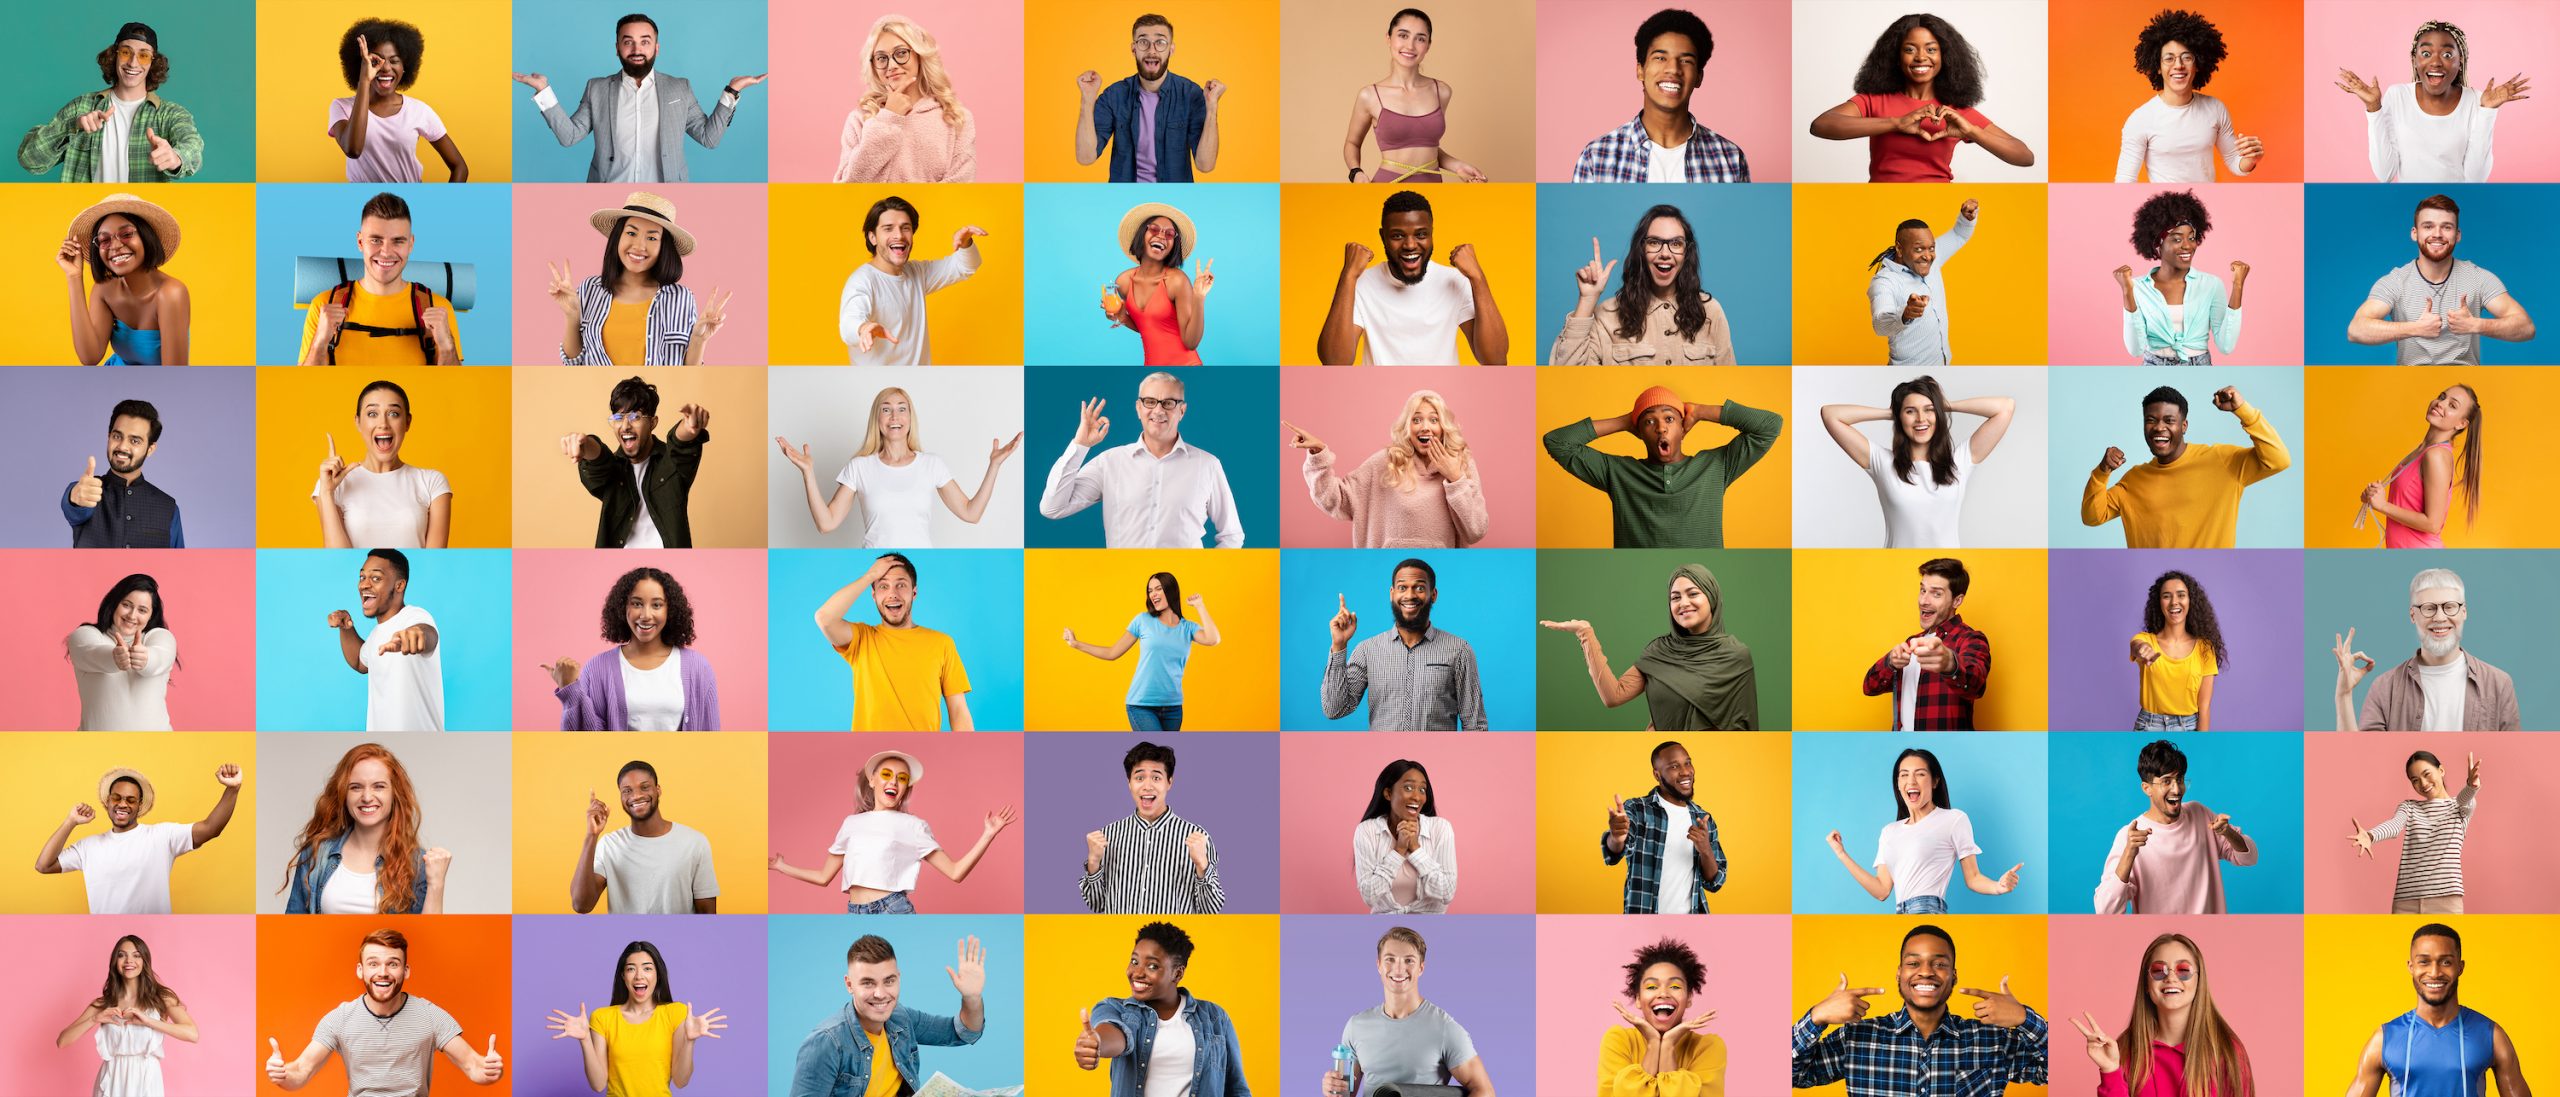 Collage Of Different Happy People Portraits Over Bright Studio Backgrounds, Diverse Cheerful Multiethnic Men And Women Of Different Age Posing And Gesturing Over Colorful Backdrops, Mosaic